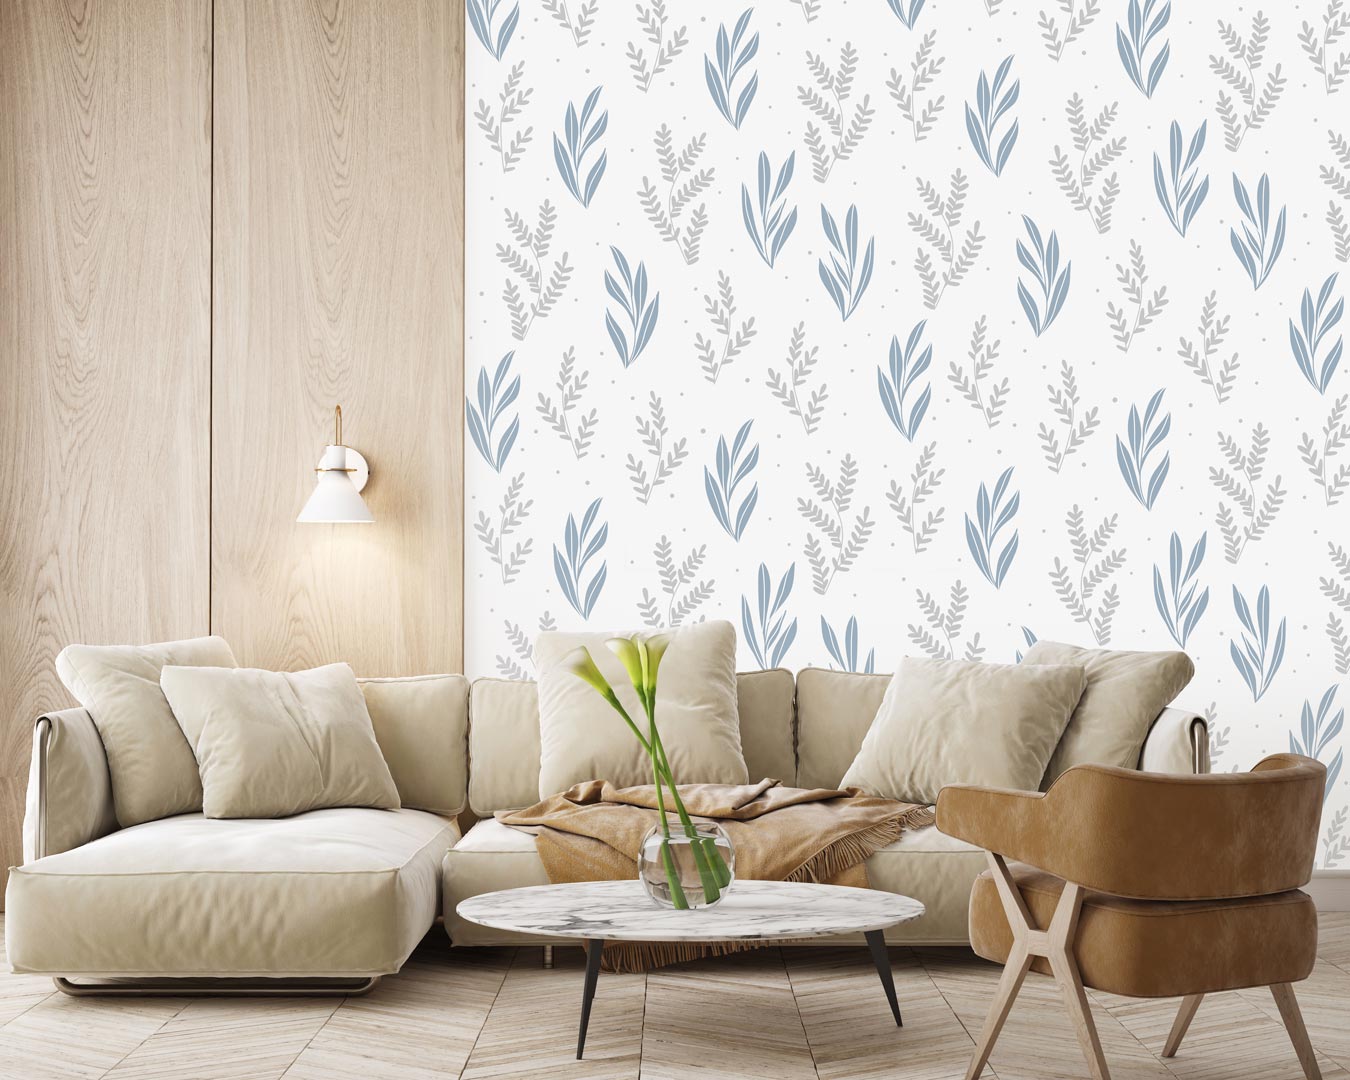 Boho wallpaper with grey and blue underwater plants on a light grey background - Dekoori image 2